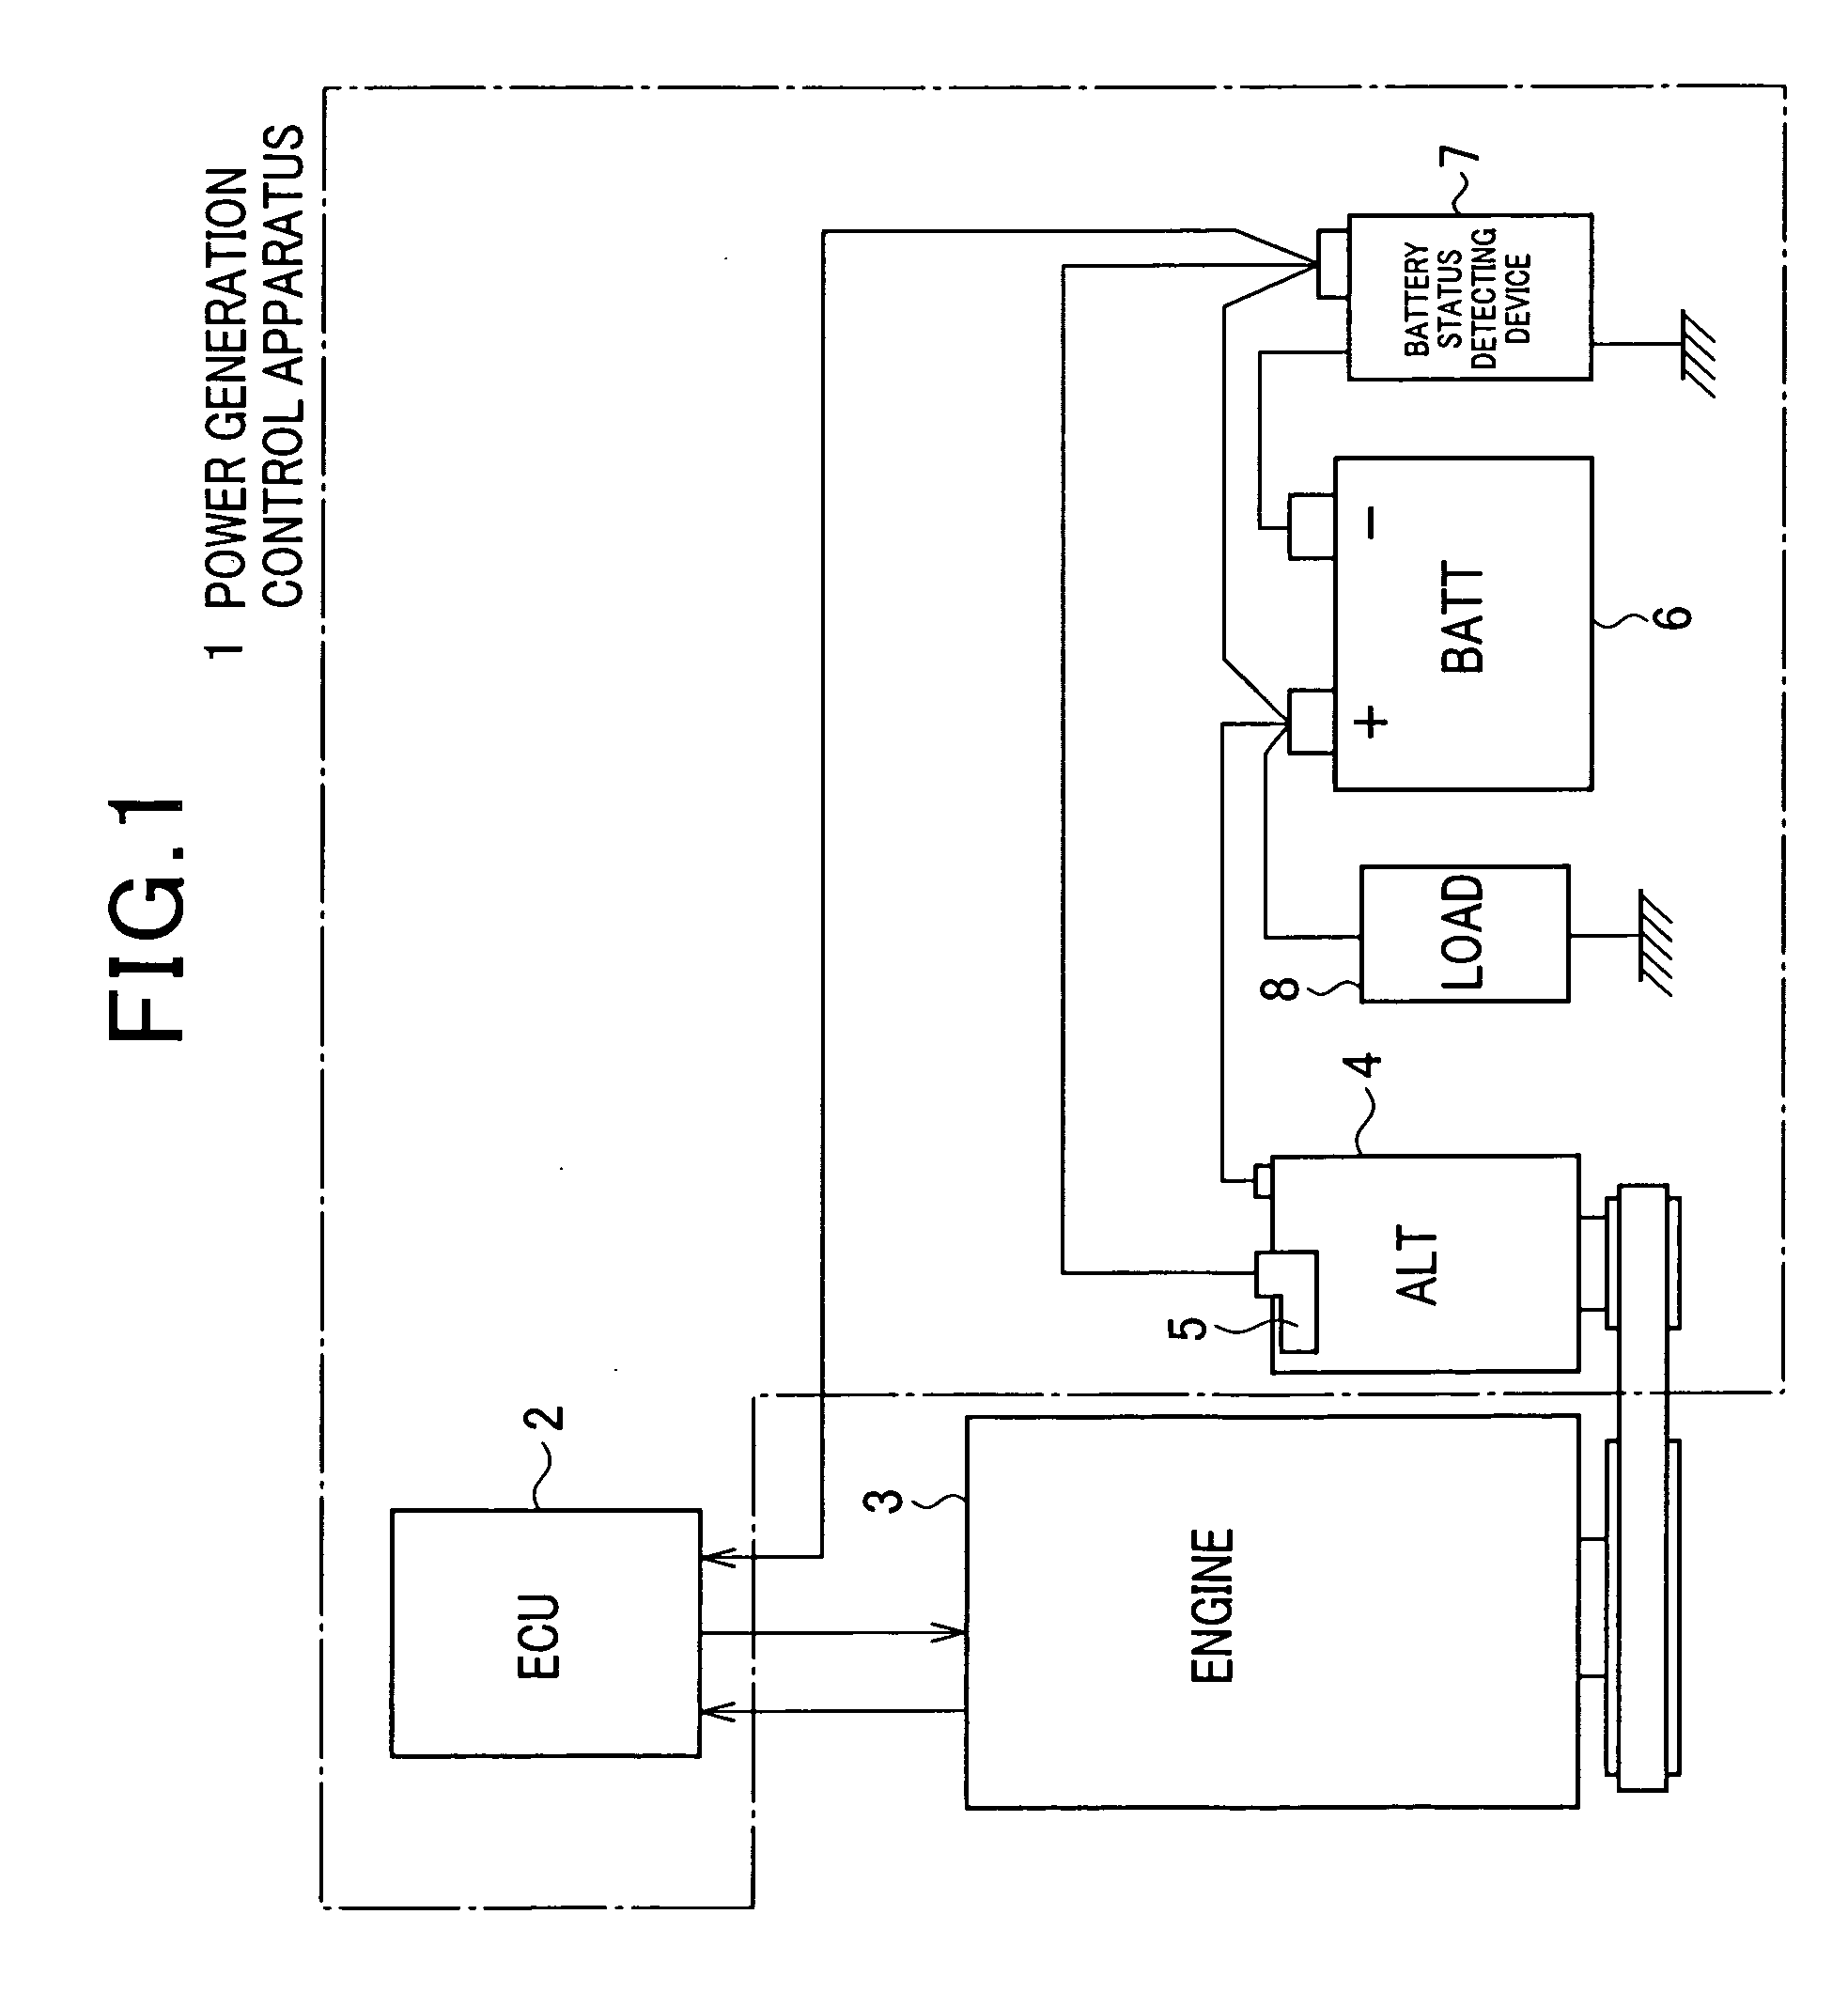 Apparatus for controlling power generated by on-vehicle generator on the basis of internal status of on-vehicle battery